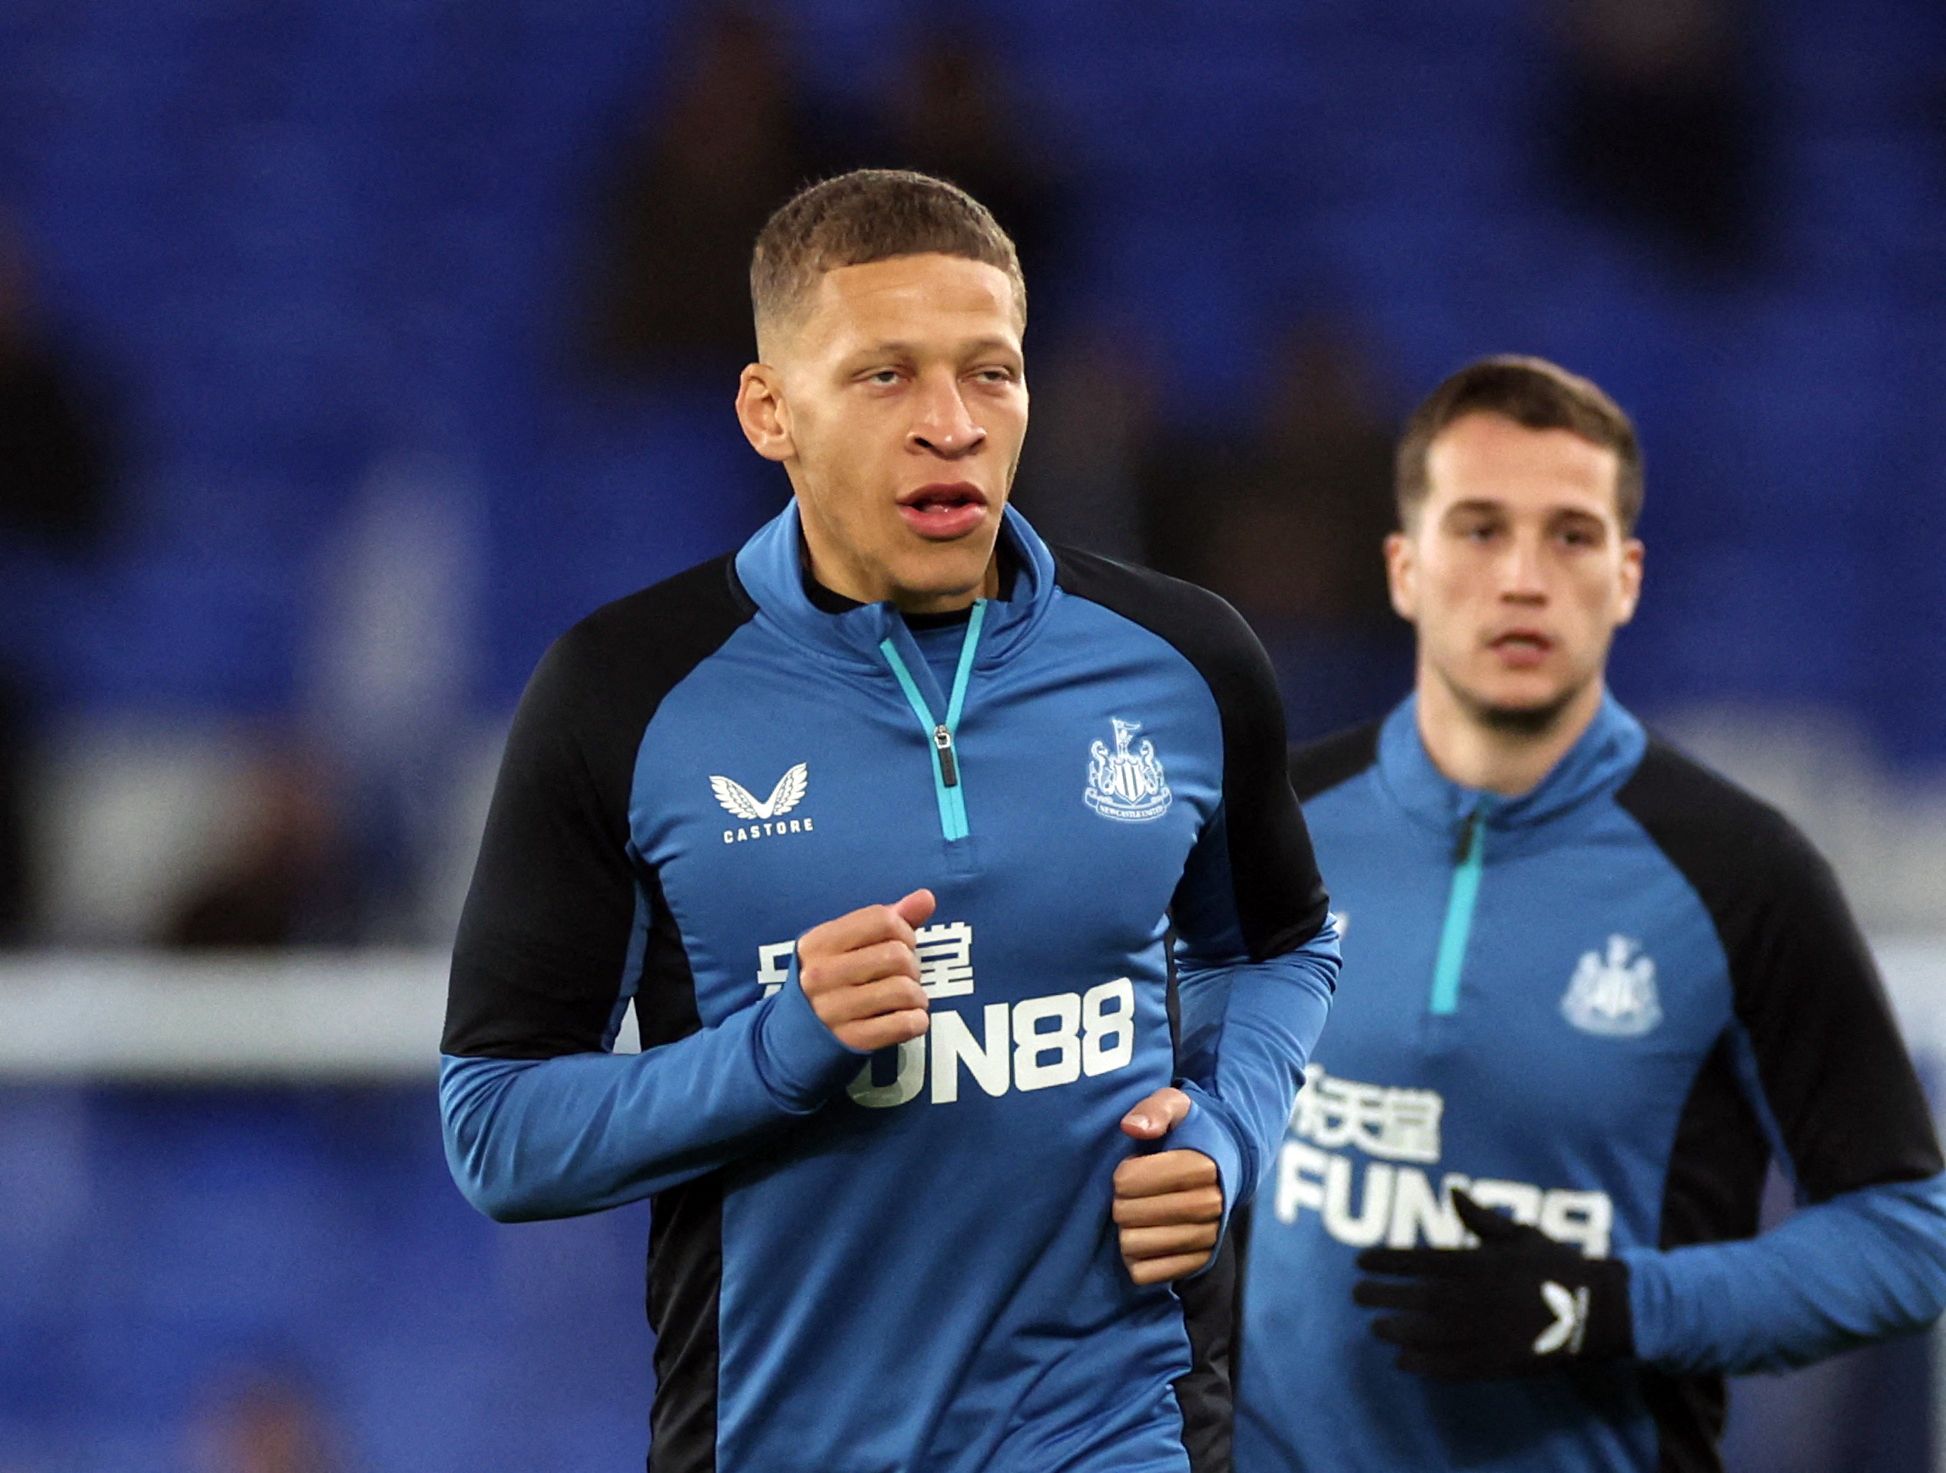 Soccer Football - Premier League - Everton v Newcastle United - Goodison Park, Liverpool, Britain - March 17, 2022 Newcastle United's Dwight Gayle during the warm up before the match REUTERS/Phil Noble EDITORIAL USE ONLY. No use with unauthorized audio, video, data, fixture lists, club/league logos or 'live' services. Online in-match use limited to 75 images, no video emulation. No use in betting, games or single club /league/player publications.  Please contact your account representative for f